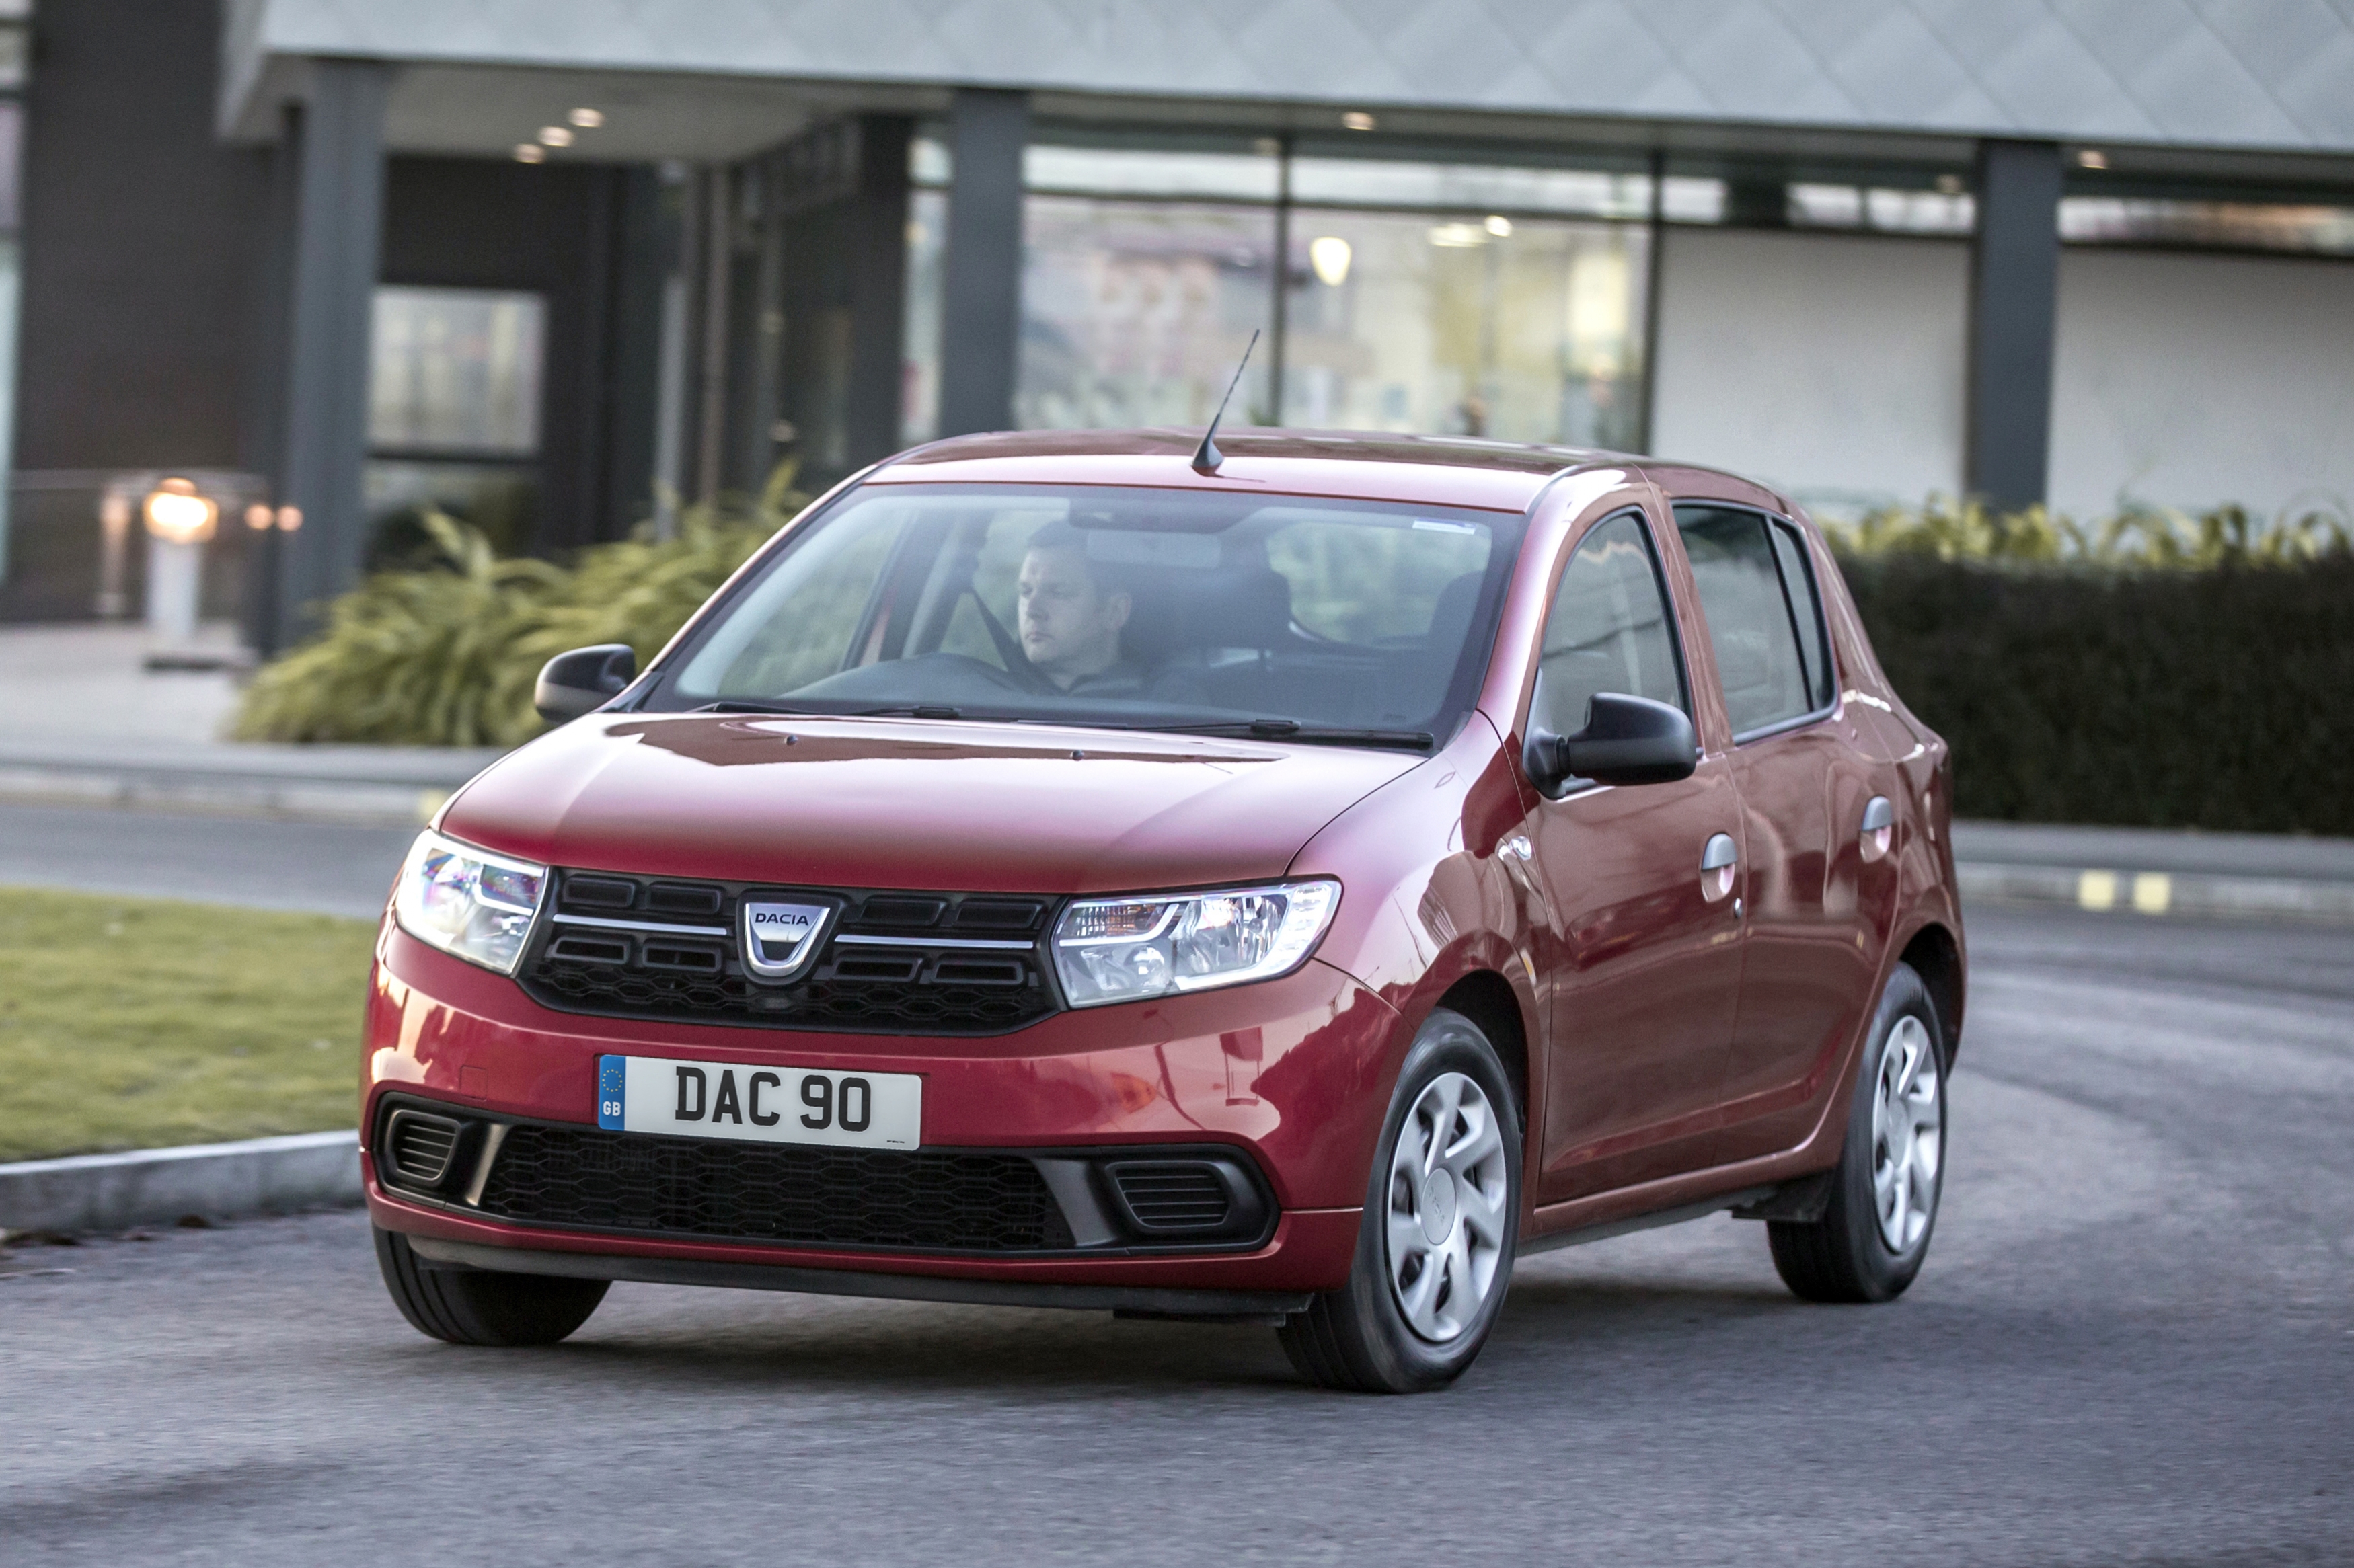 All-new Dacia Sandero: price and specs confirmed for UK's cheapest